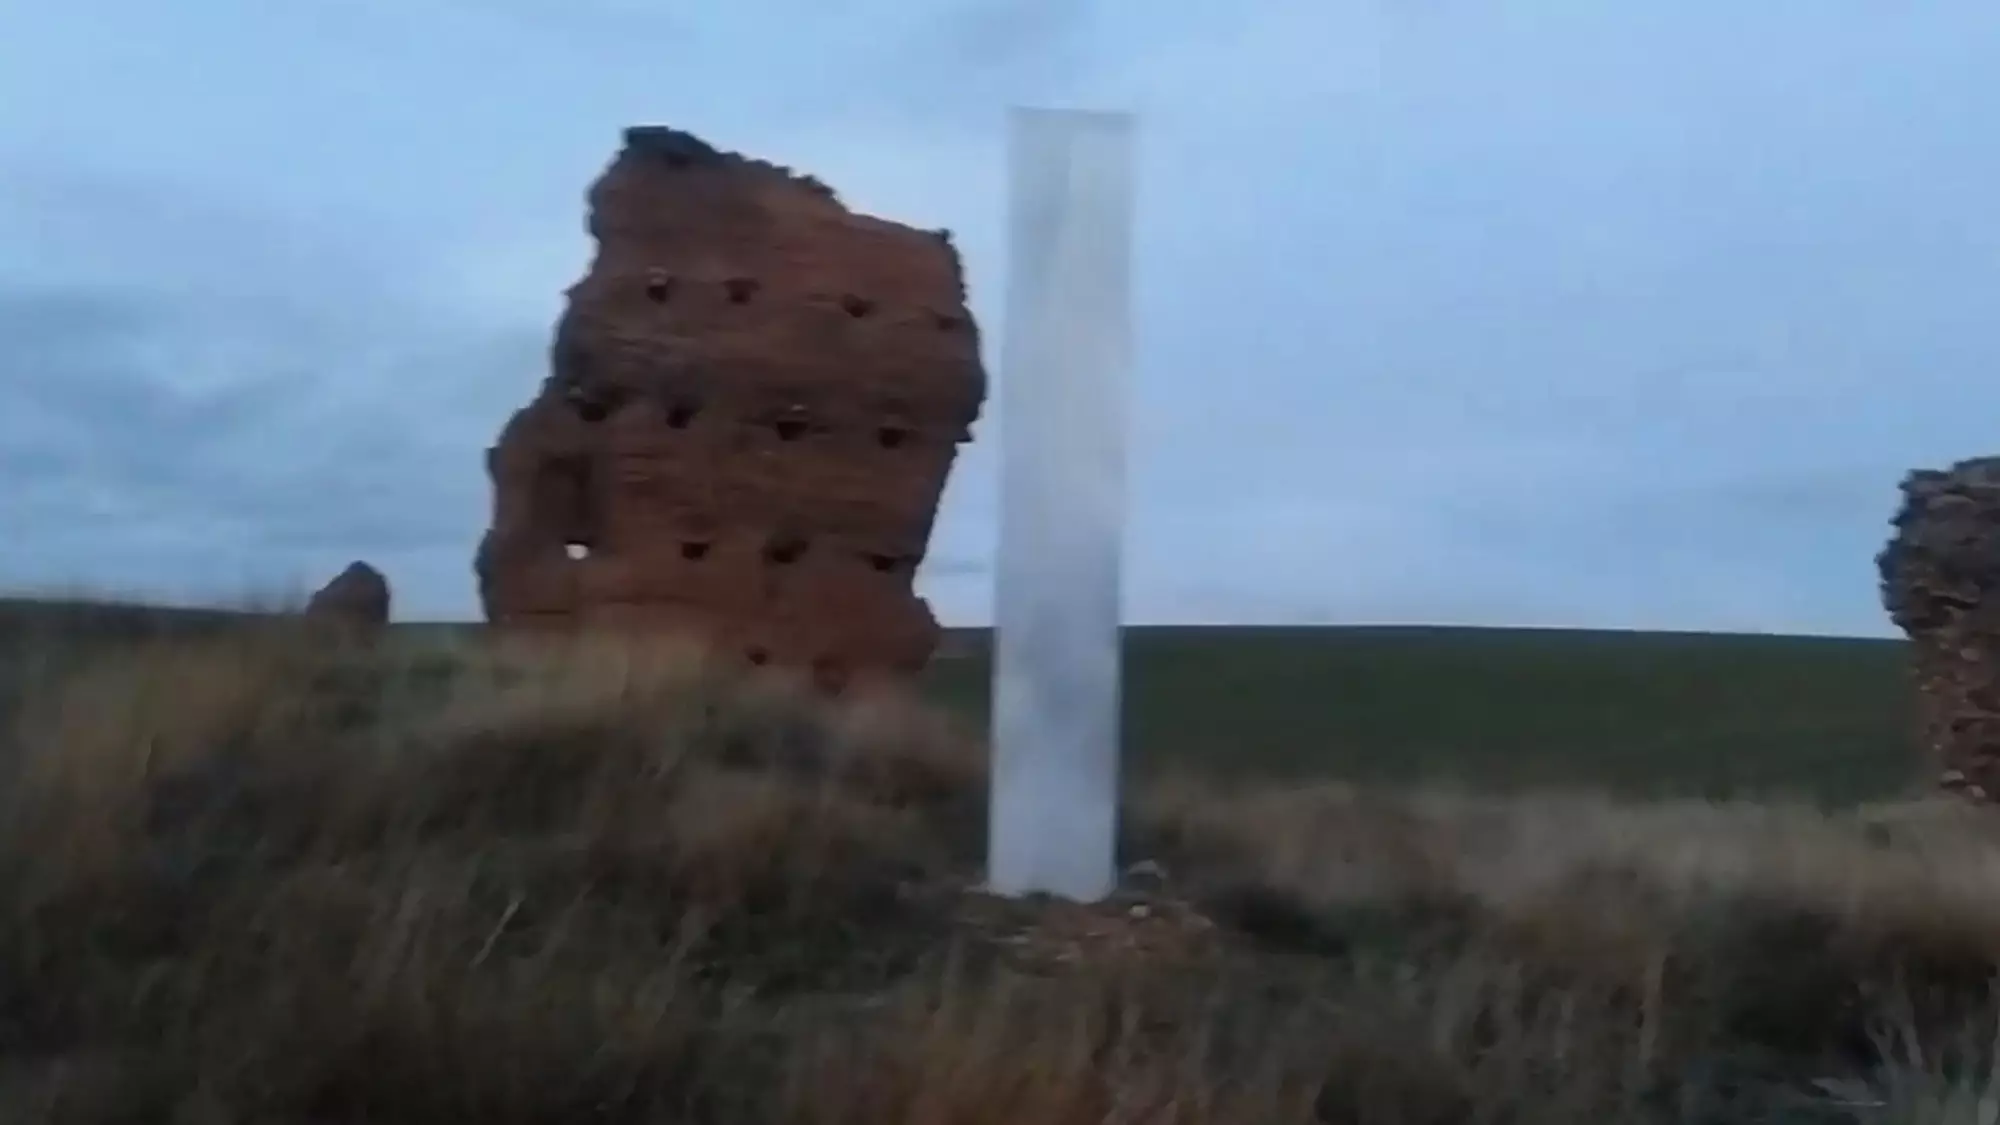 The monolith was found near the ruins of an old church in Spain.